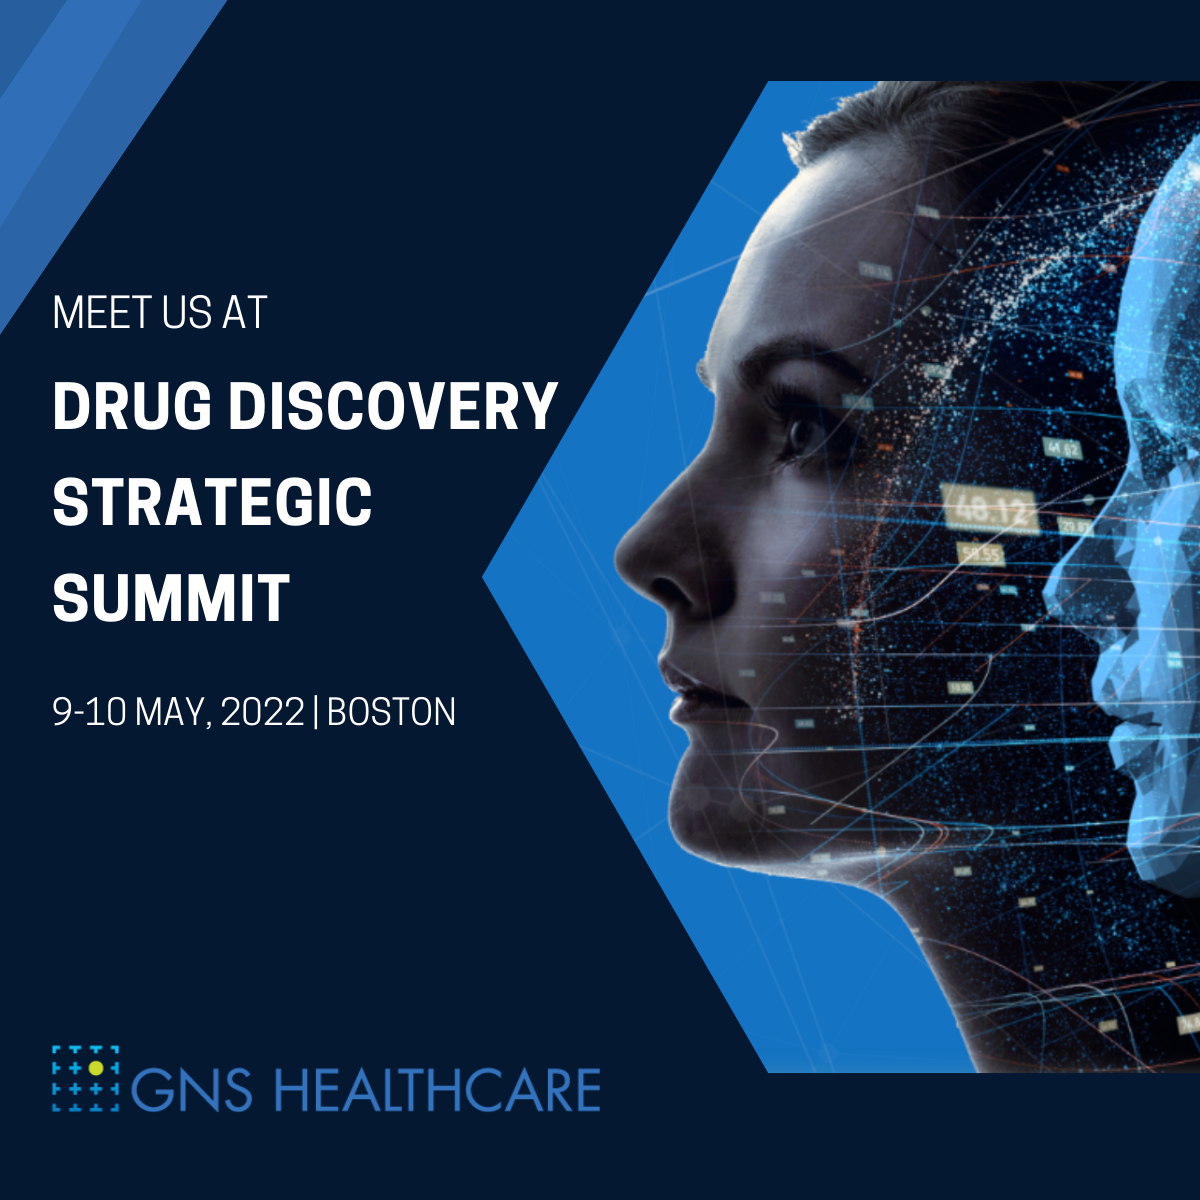 Meet us at the 9th Drug Discovery Strategic Summit